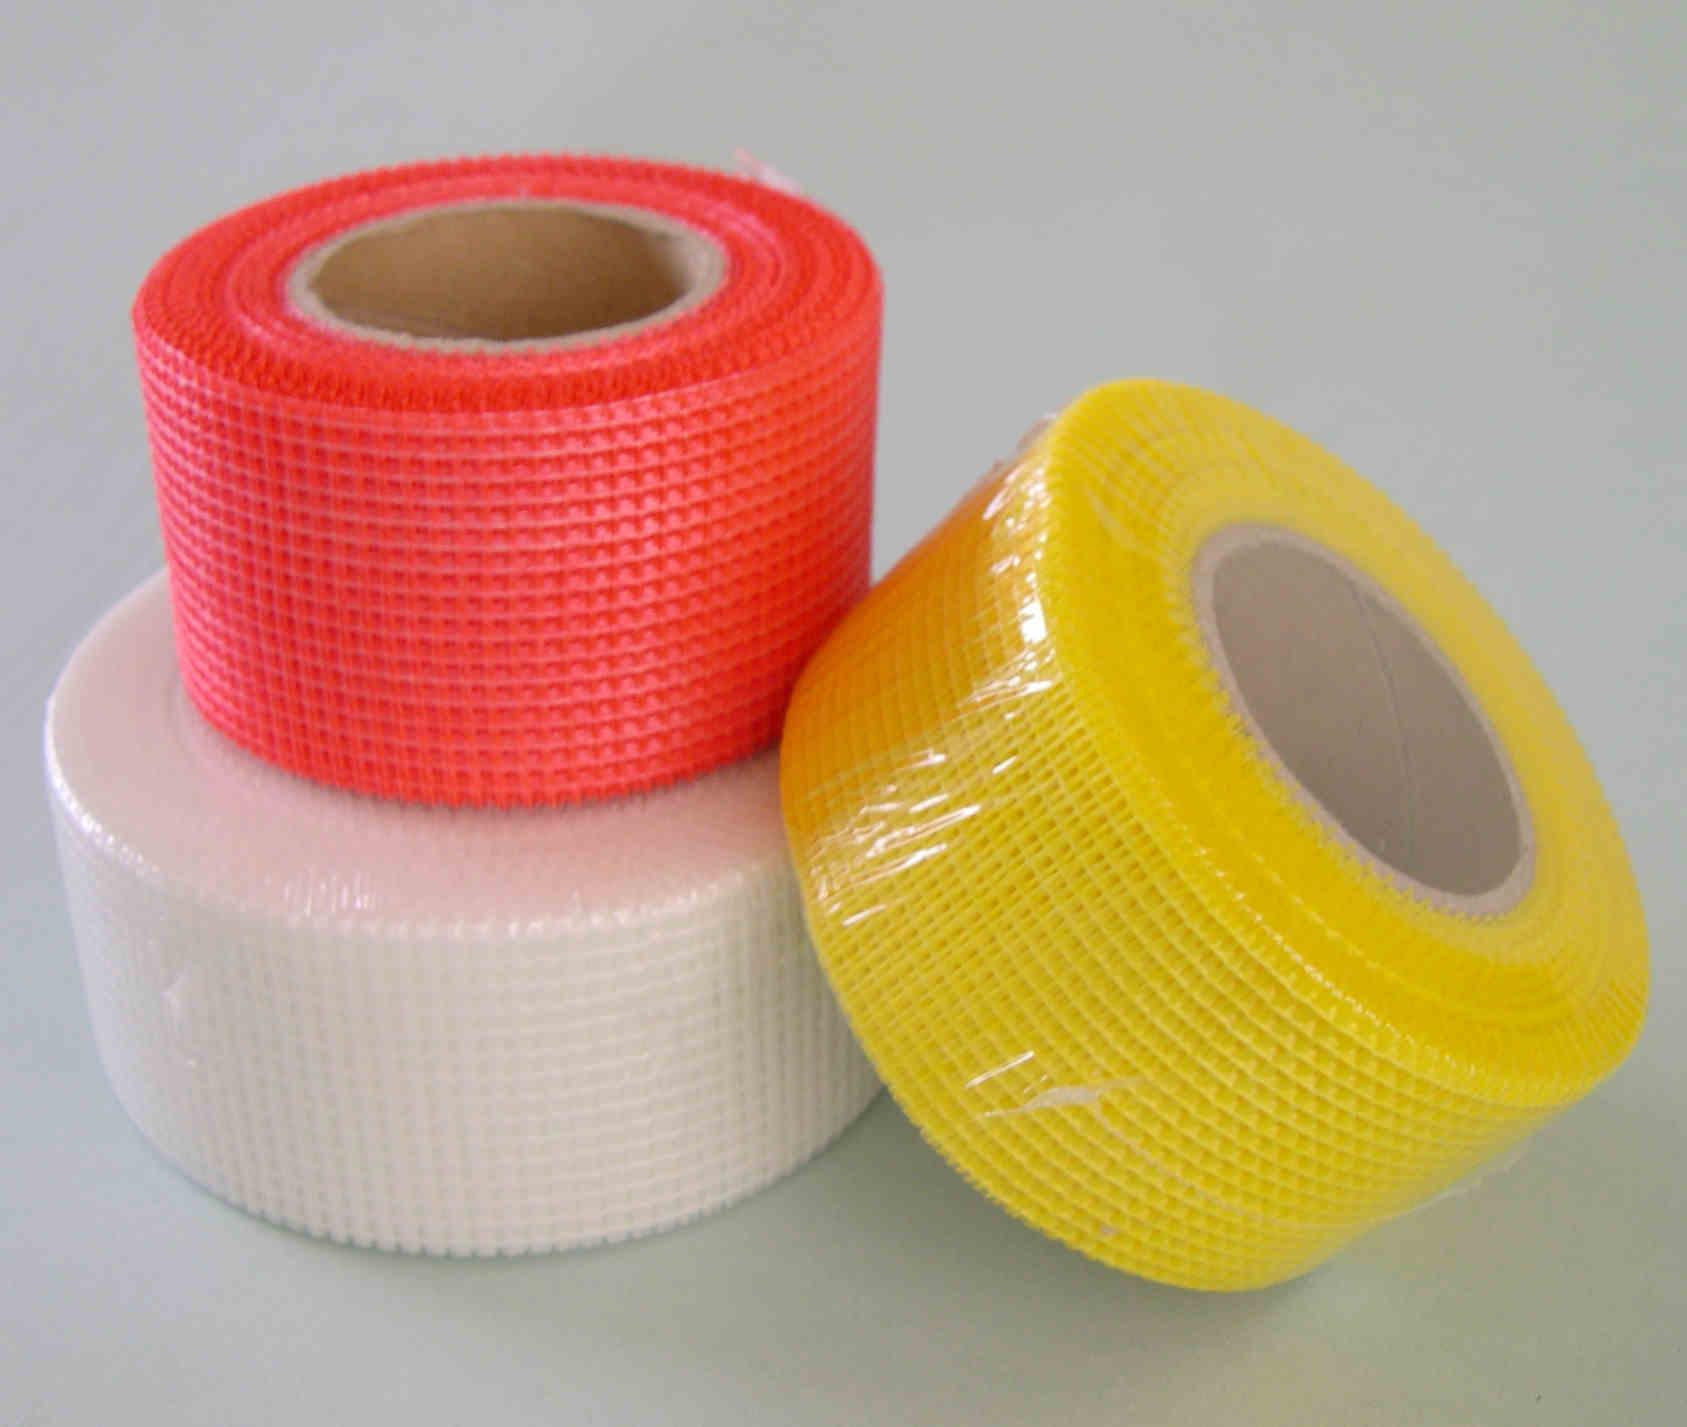 Patch Drywall Mesh Tape